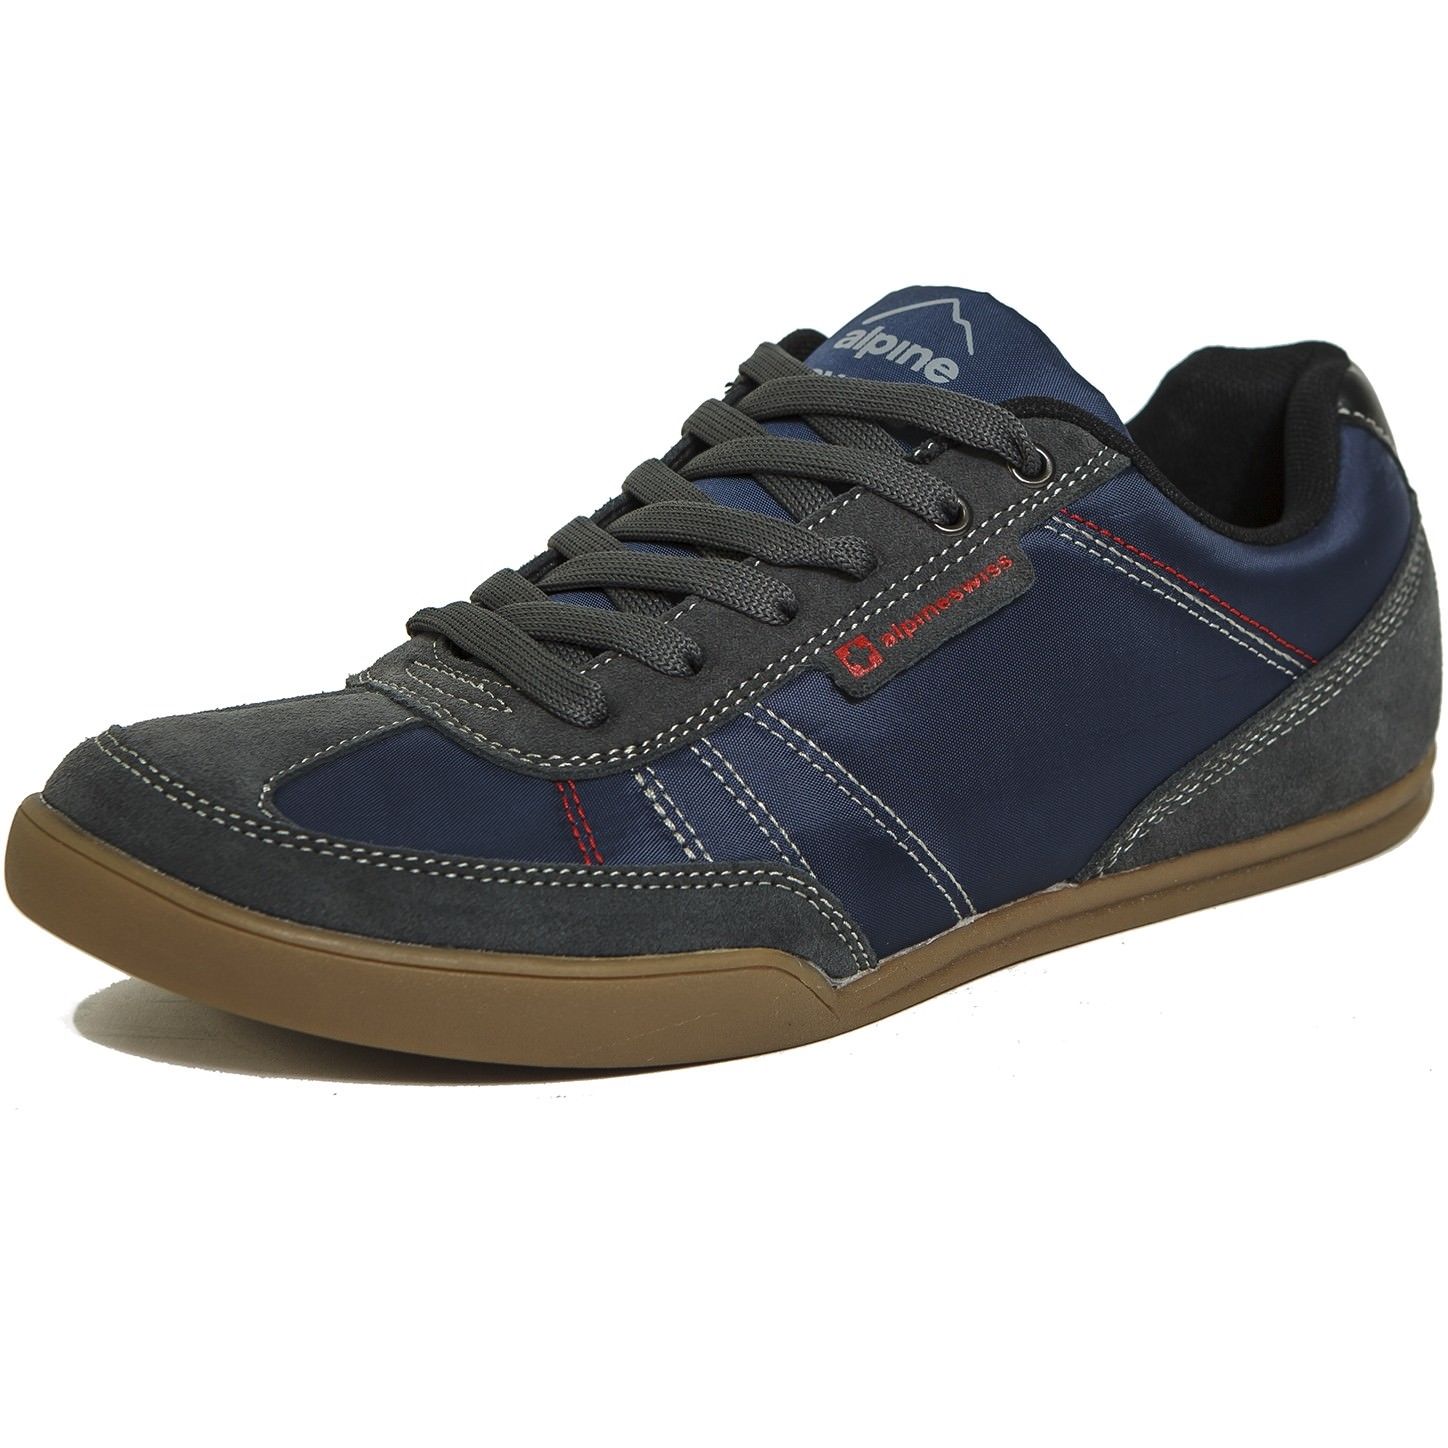 Alpine Swiss casual men’s shoes for $28, free shipping